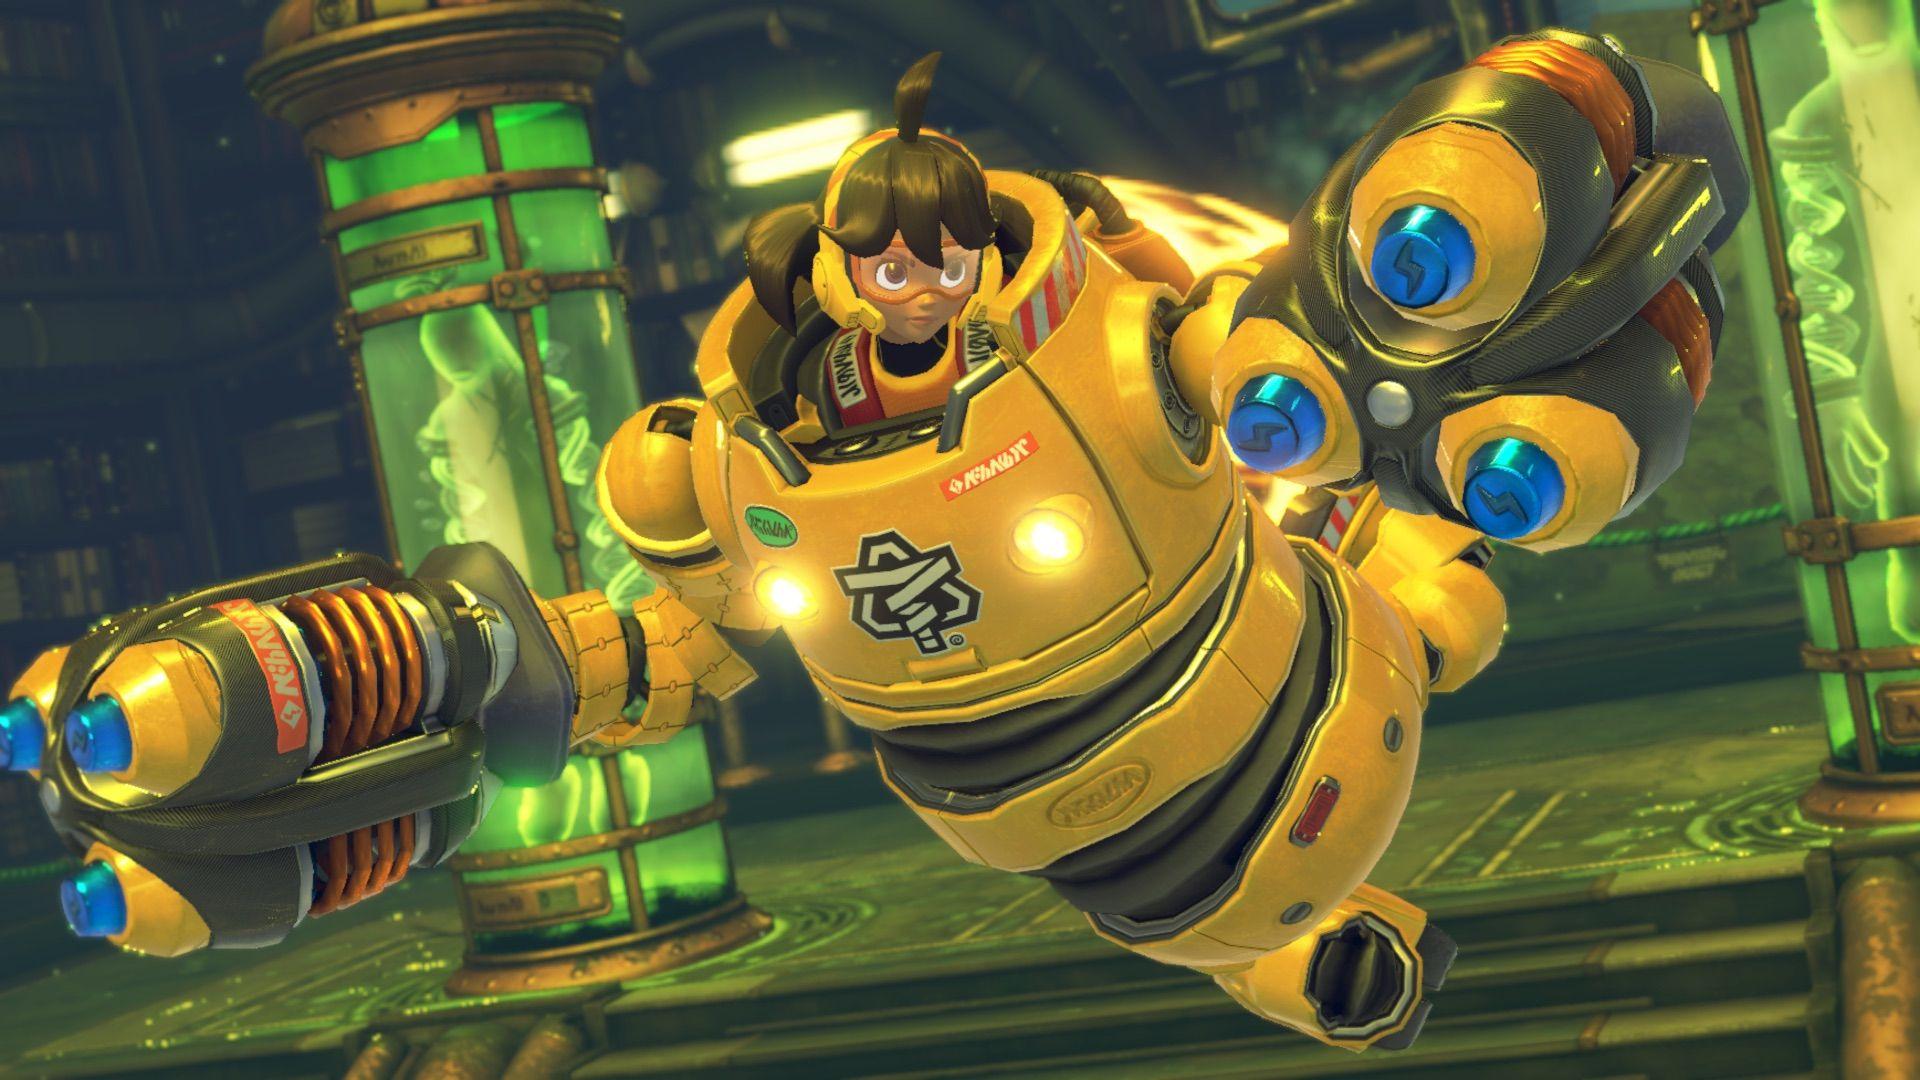 Arms review: is Nintendo's new fighting game for you?